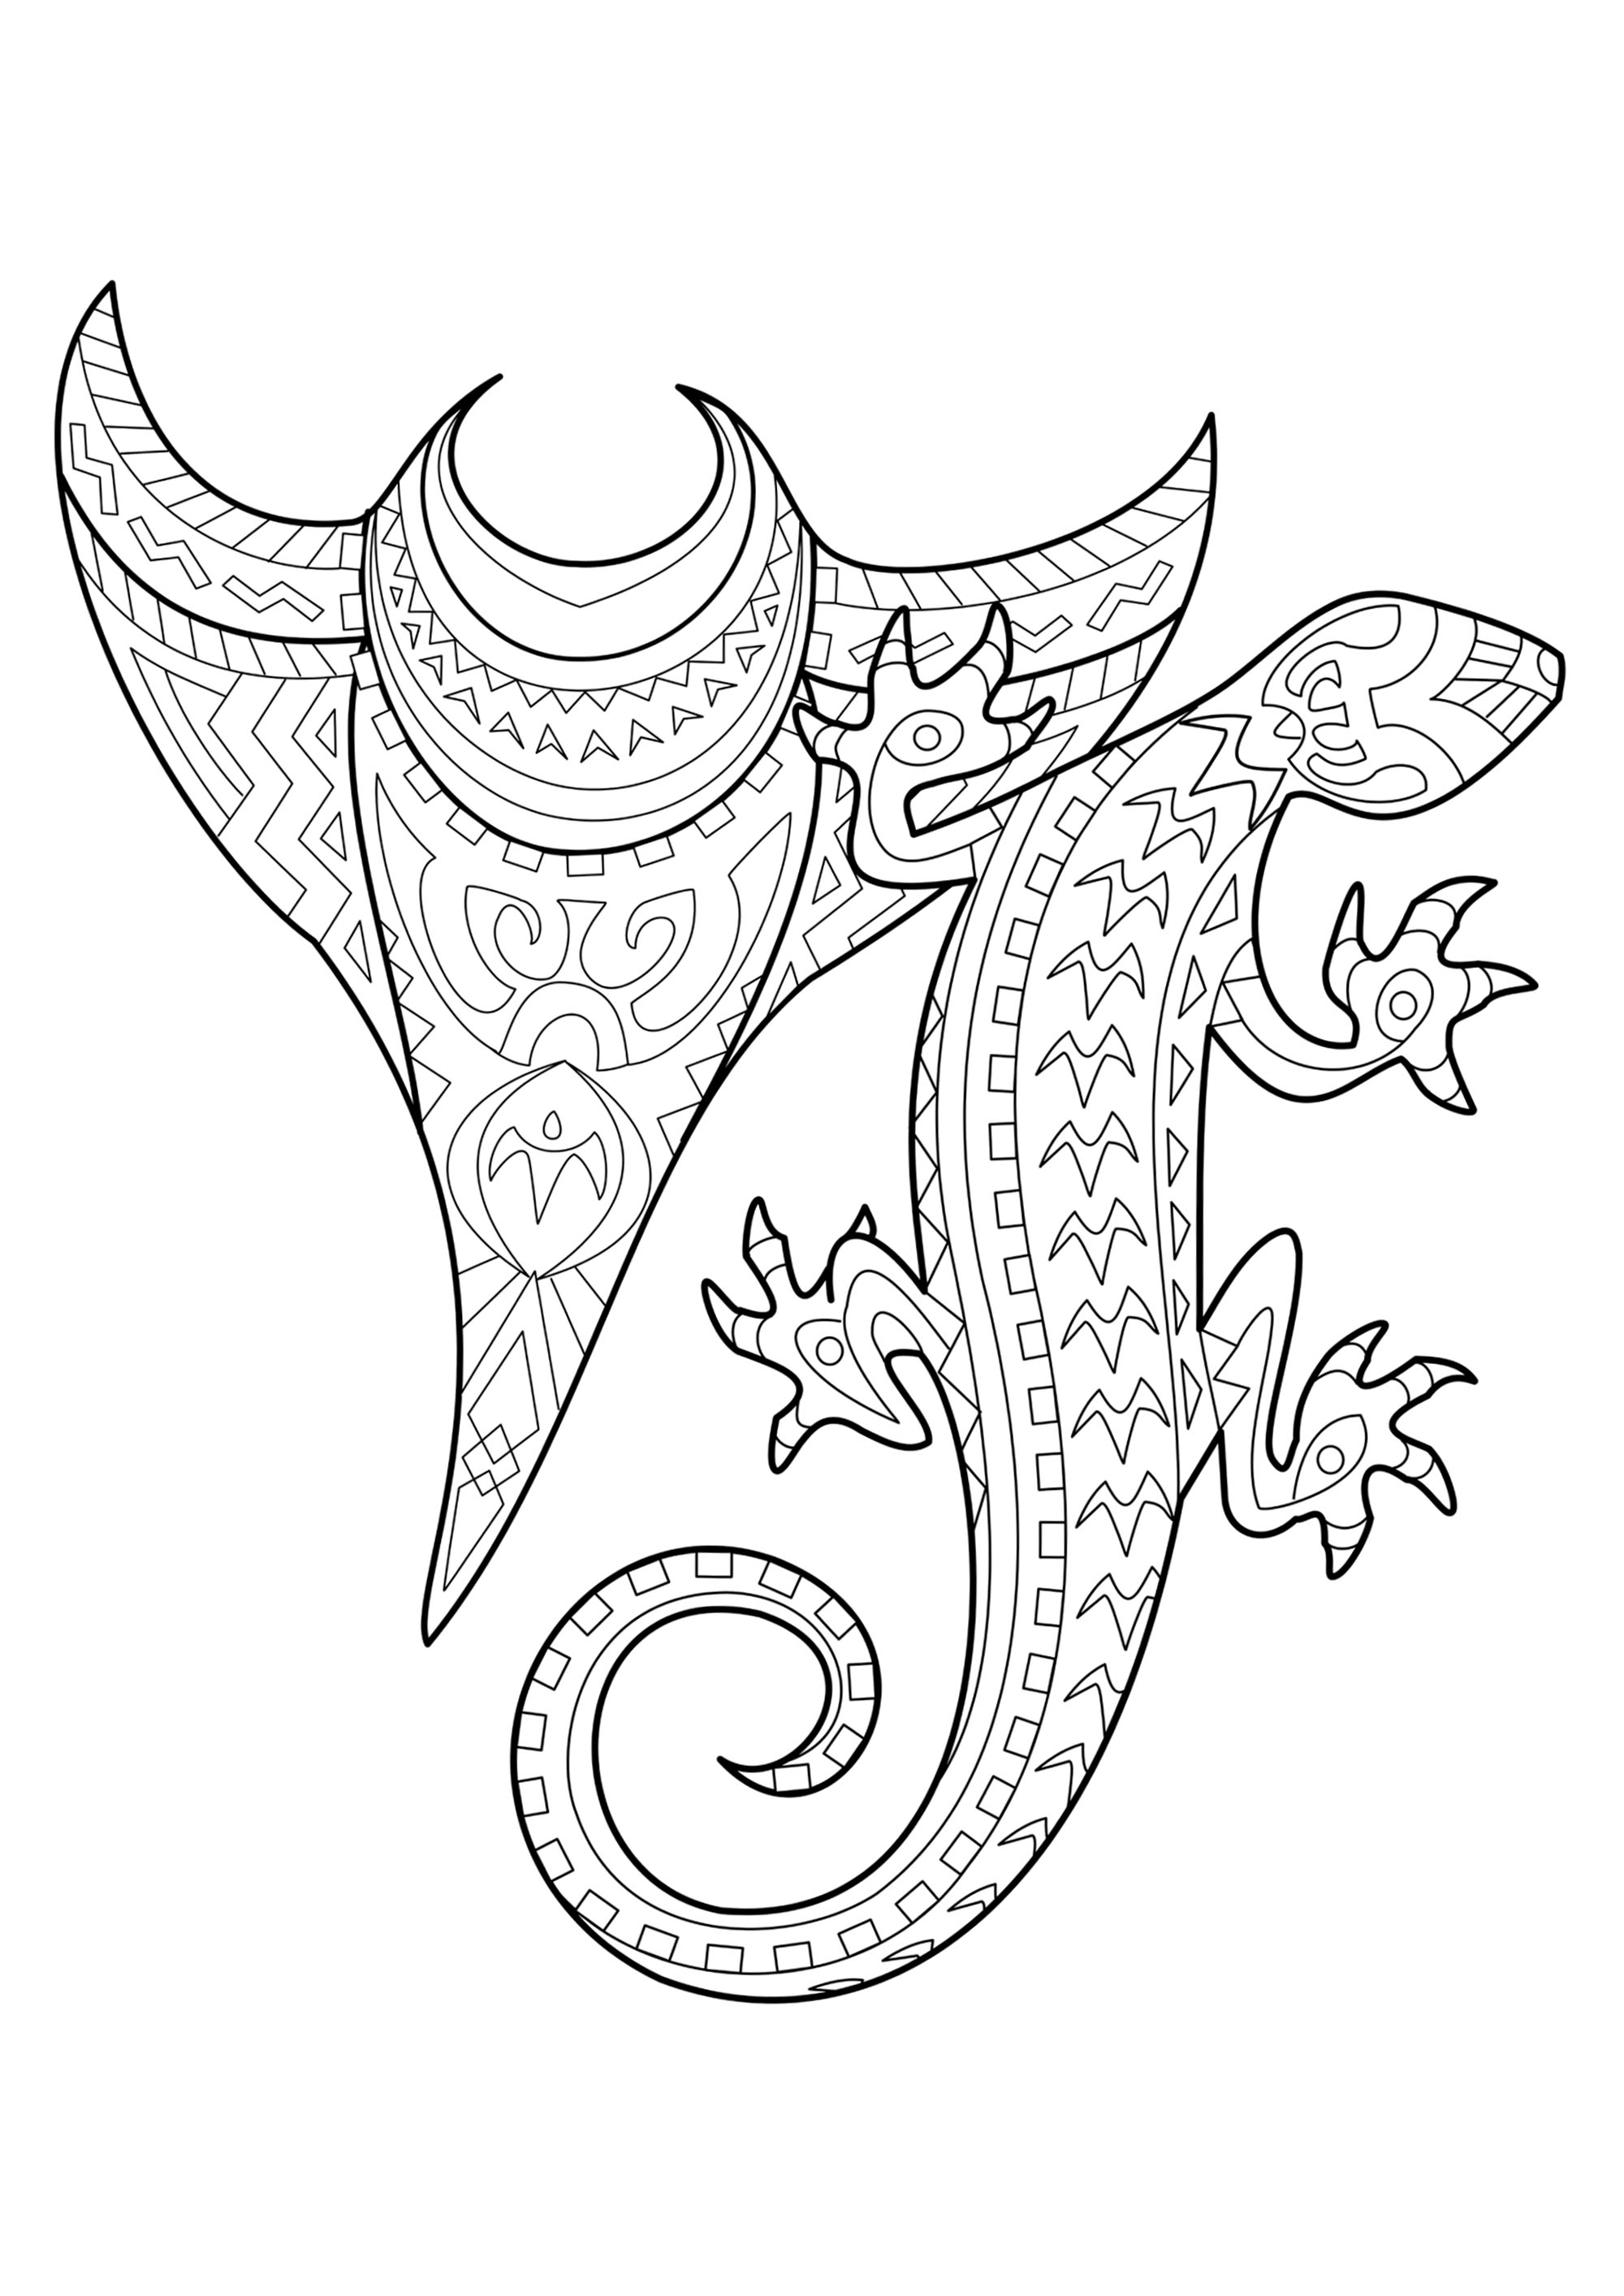 Download Tattoo Coloring Pages for Adults - Best Coloring Pages For Kids